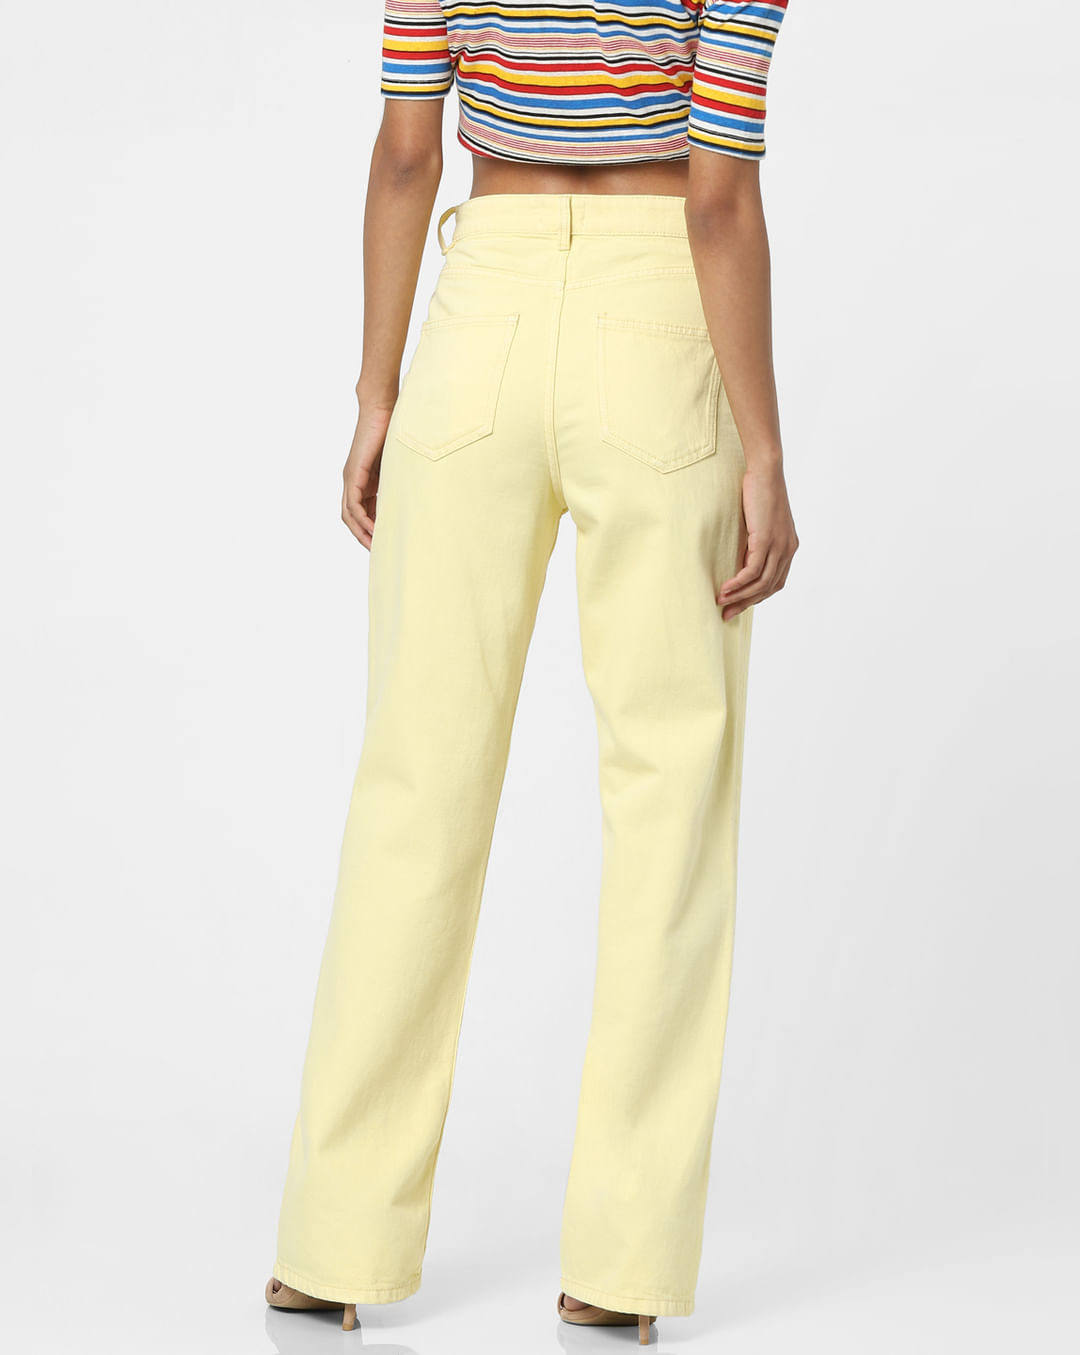 Yellow High Waist Flared Jeans